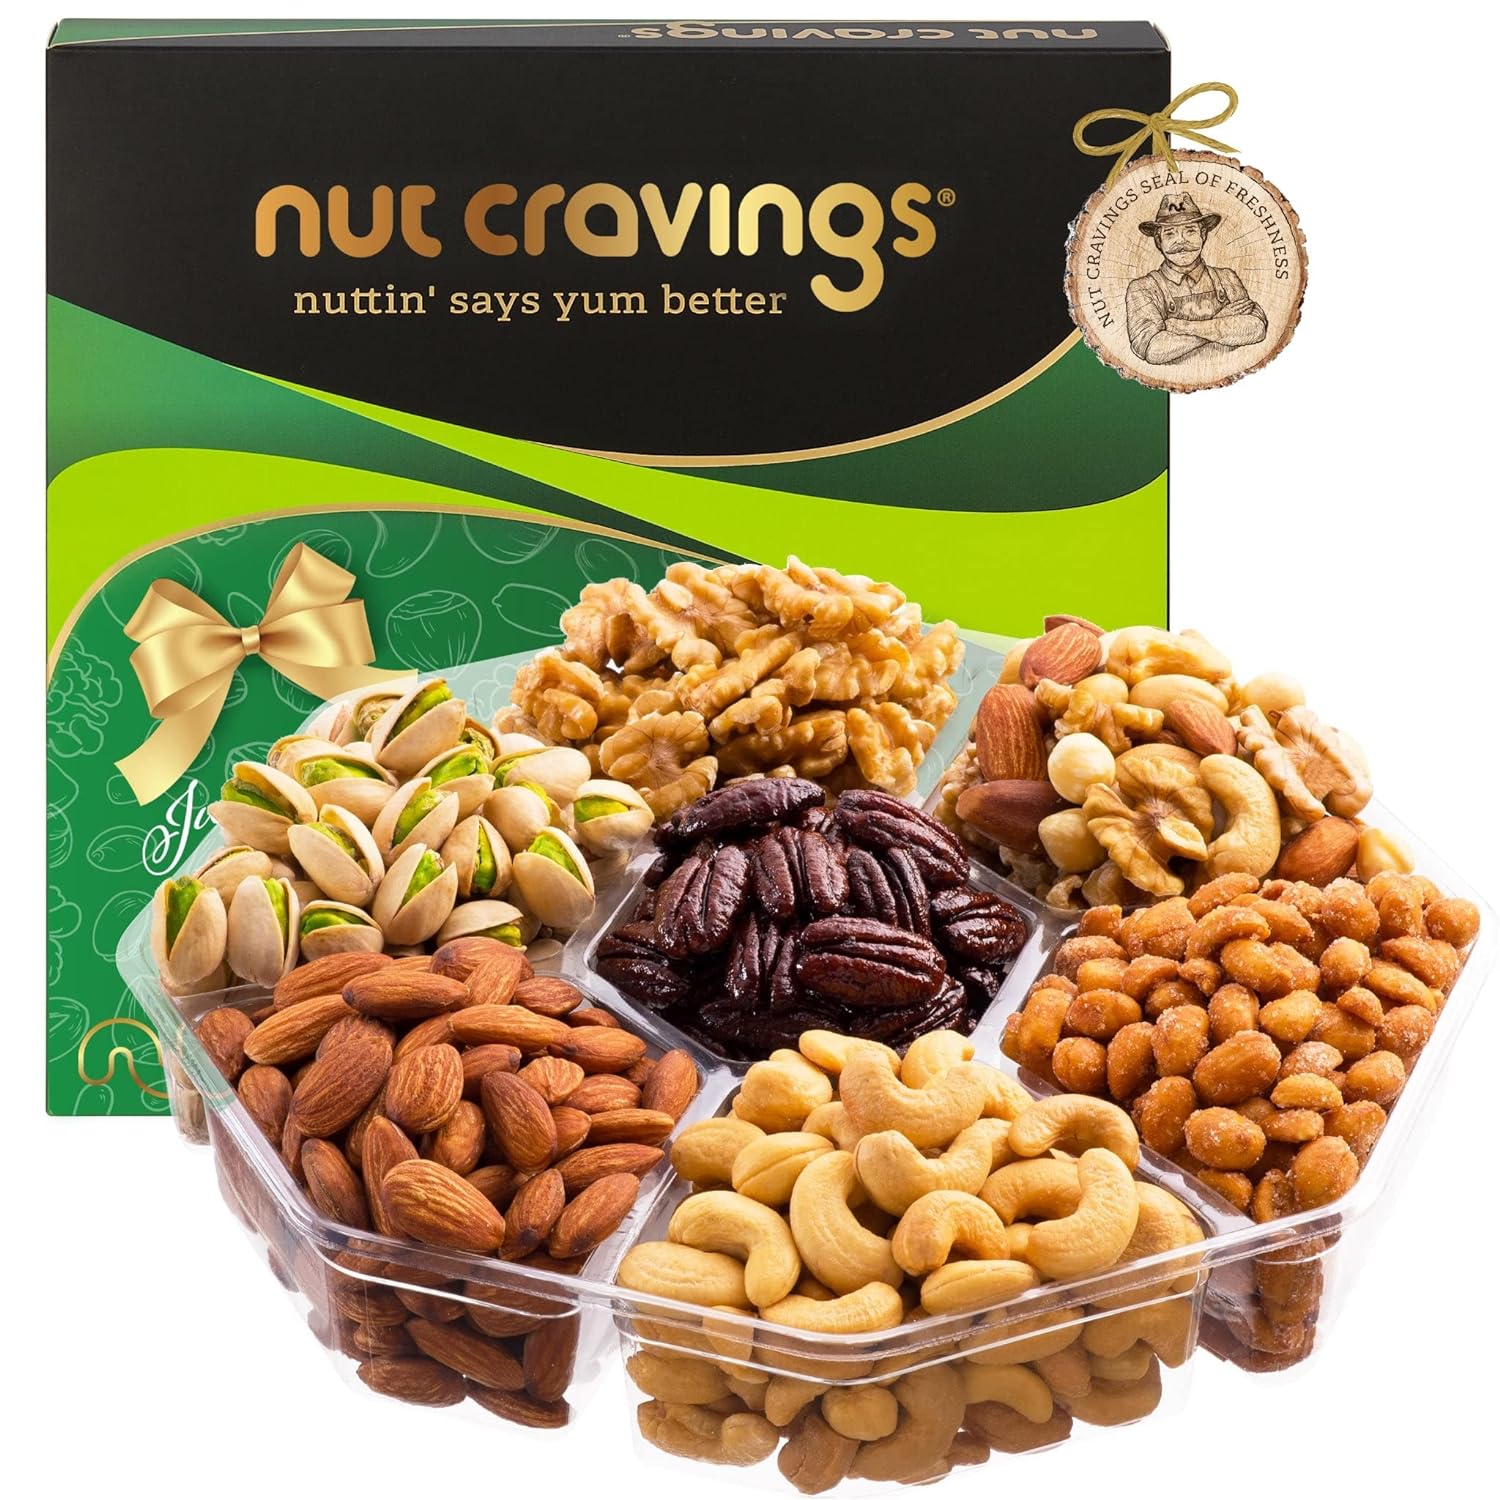 Nut Cravings Gourmet Collection - Mothers Day Mixed Nuts Gift Basket in Green Gold Box (7 Assortments, 2 LB) Arrangement Platter, Birthday Care Package - Healthy Kosher USA Made